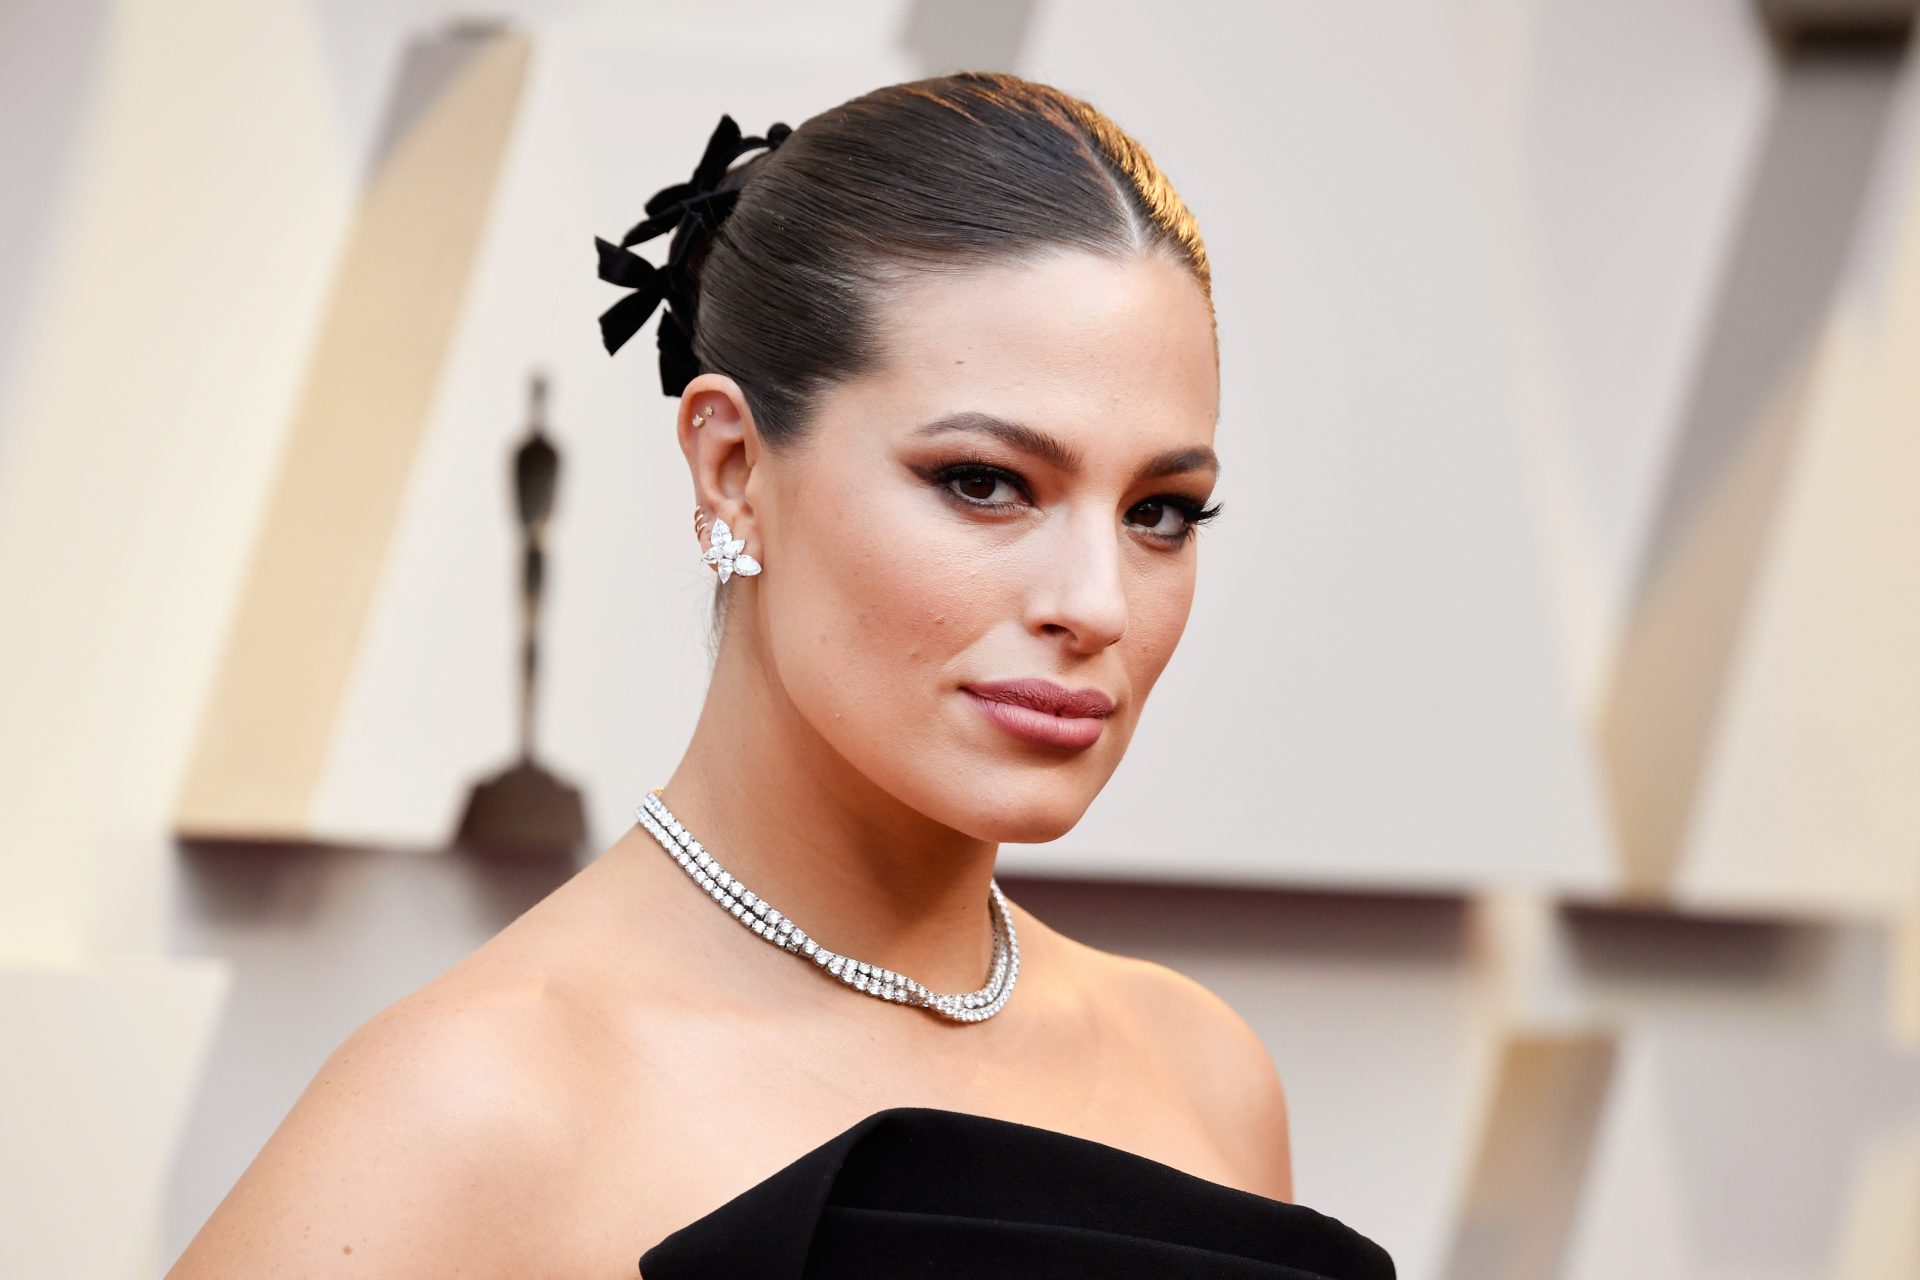 <p>At number 19, we have Ashley Graham (born in 1987), an American plus-size model and TV host who first made waves with her cover appearance on the Sports Illustrated Swimsuit Issue in 2016.</p> <p>Net worth: $10 million</p>